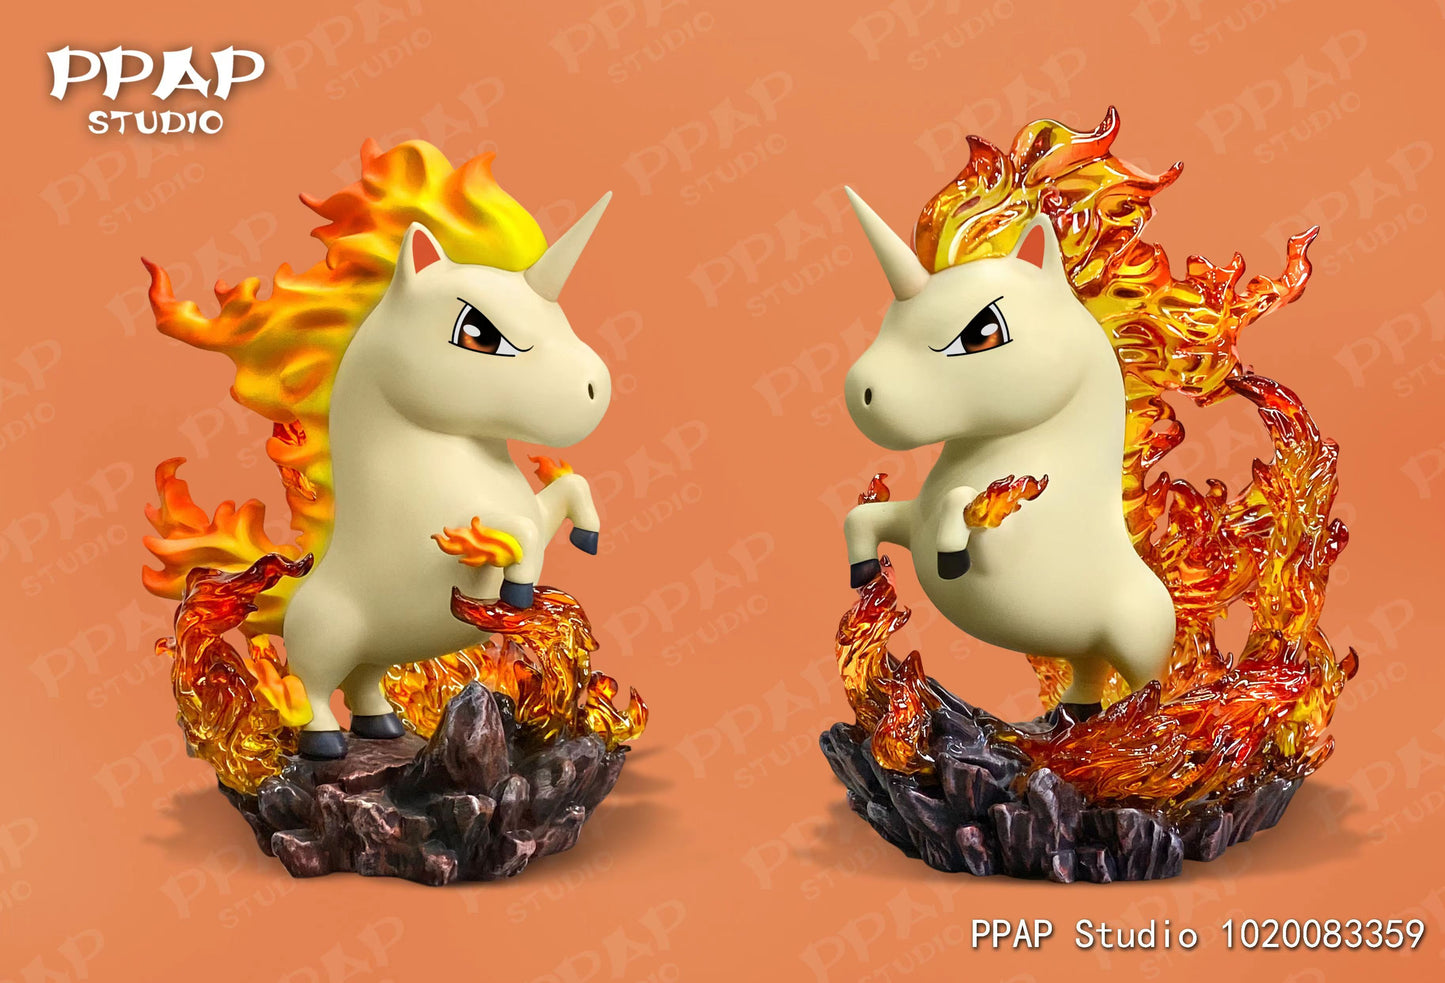 PPAP STUDIO – POKEMON: CHUBBY SERIES, RAPIDASH [SOLD OUT]